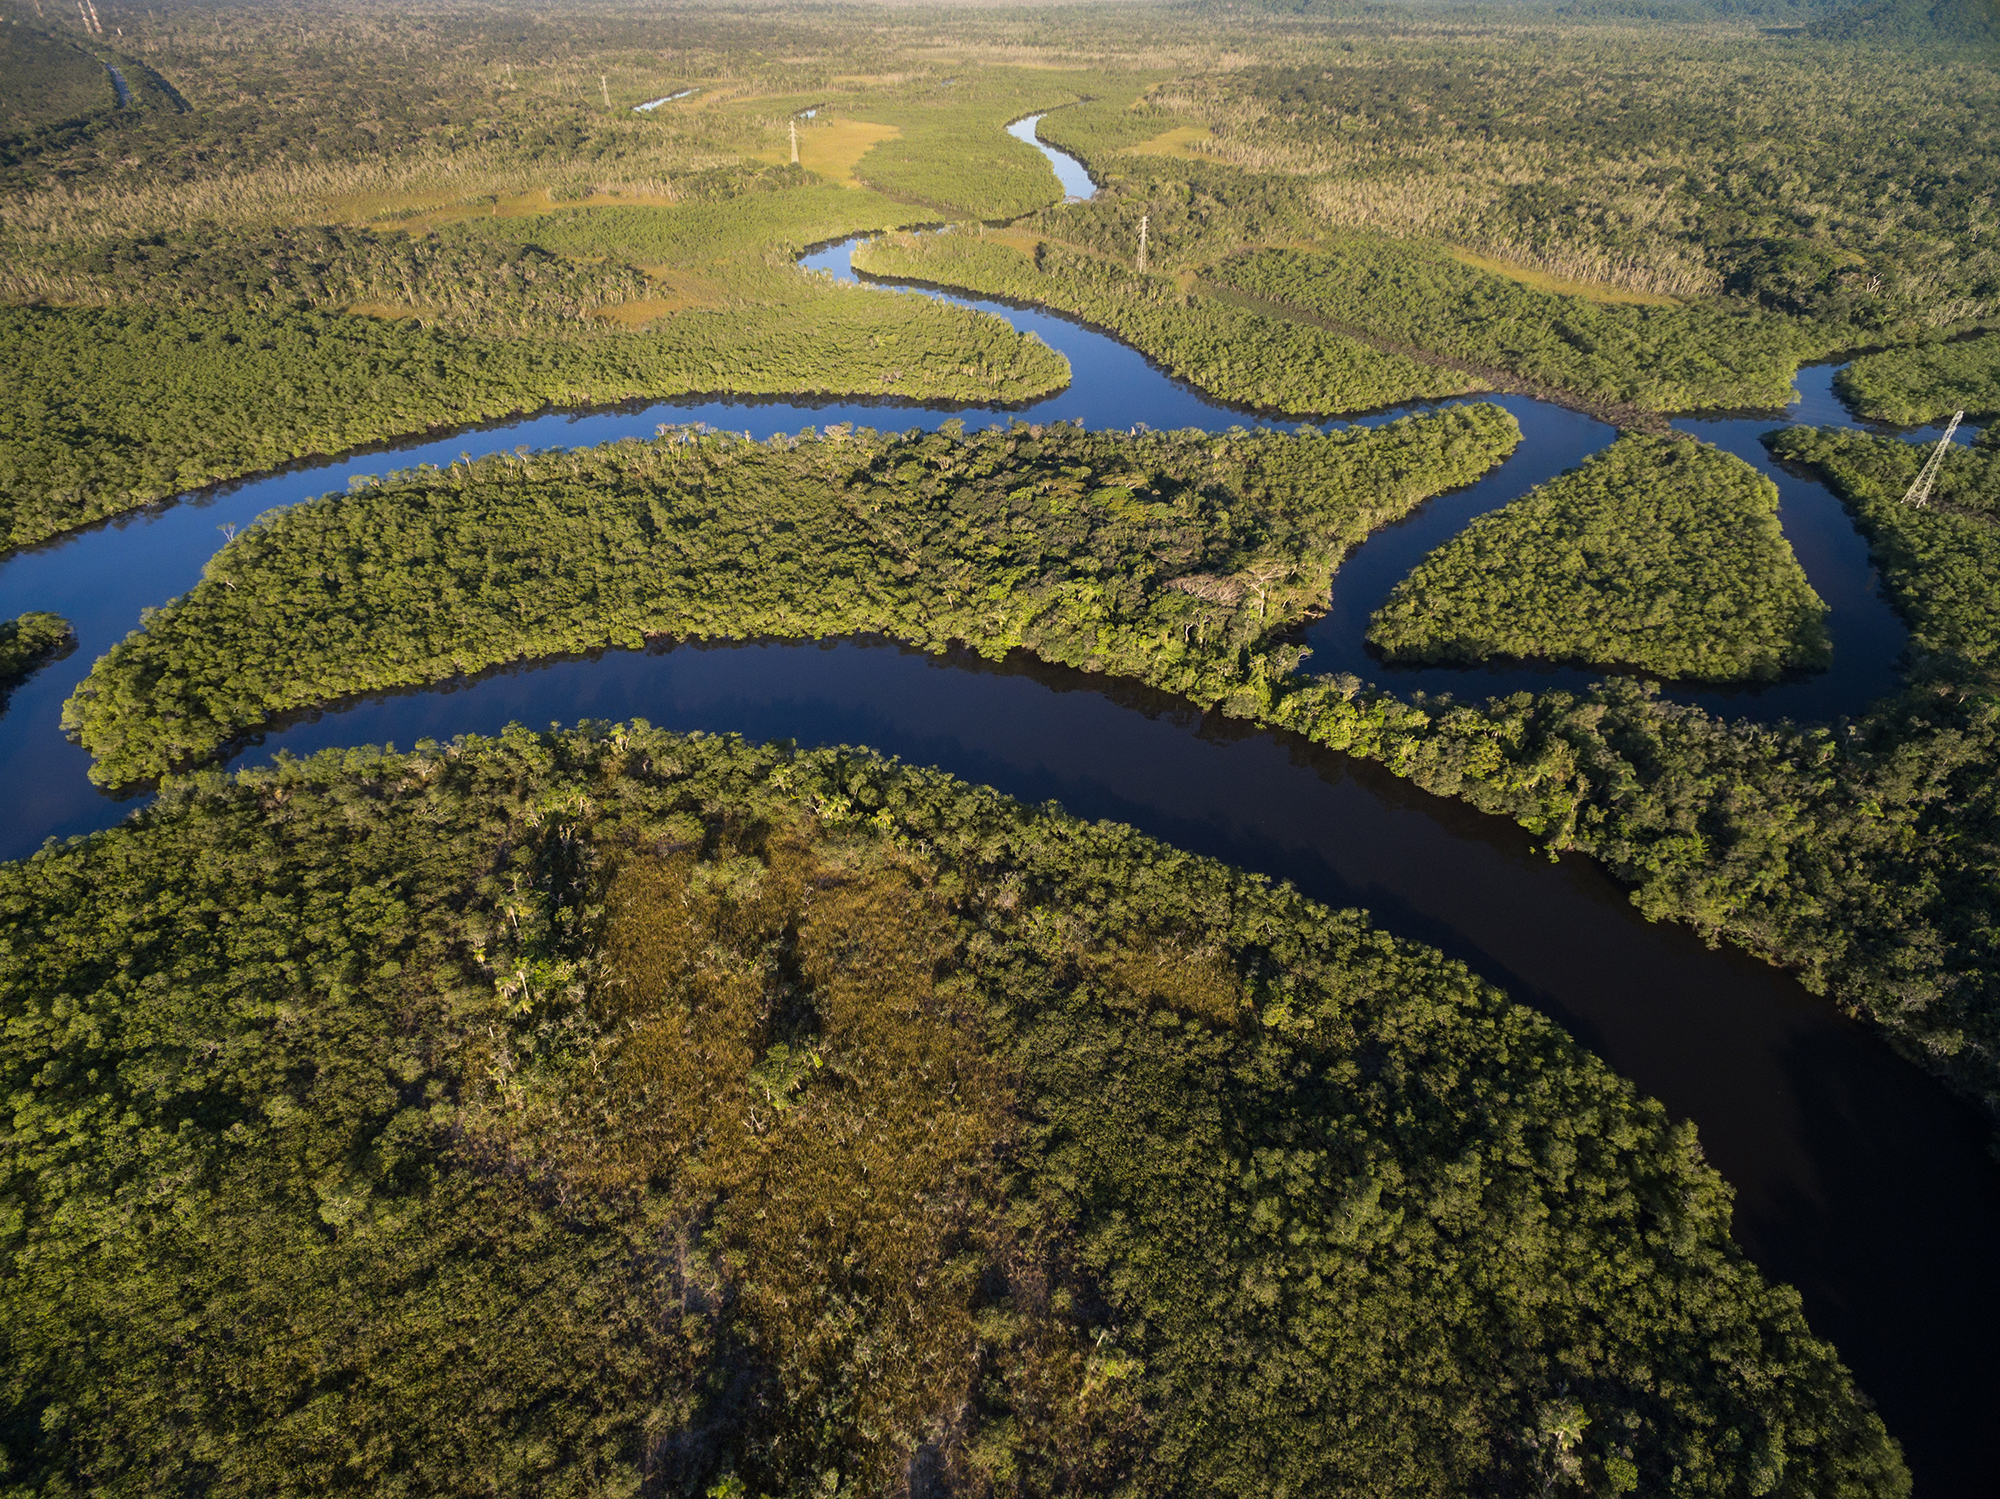 The picture shows an aerial view of the Amazon river with trees and green vegetation surrounding the river.